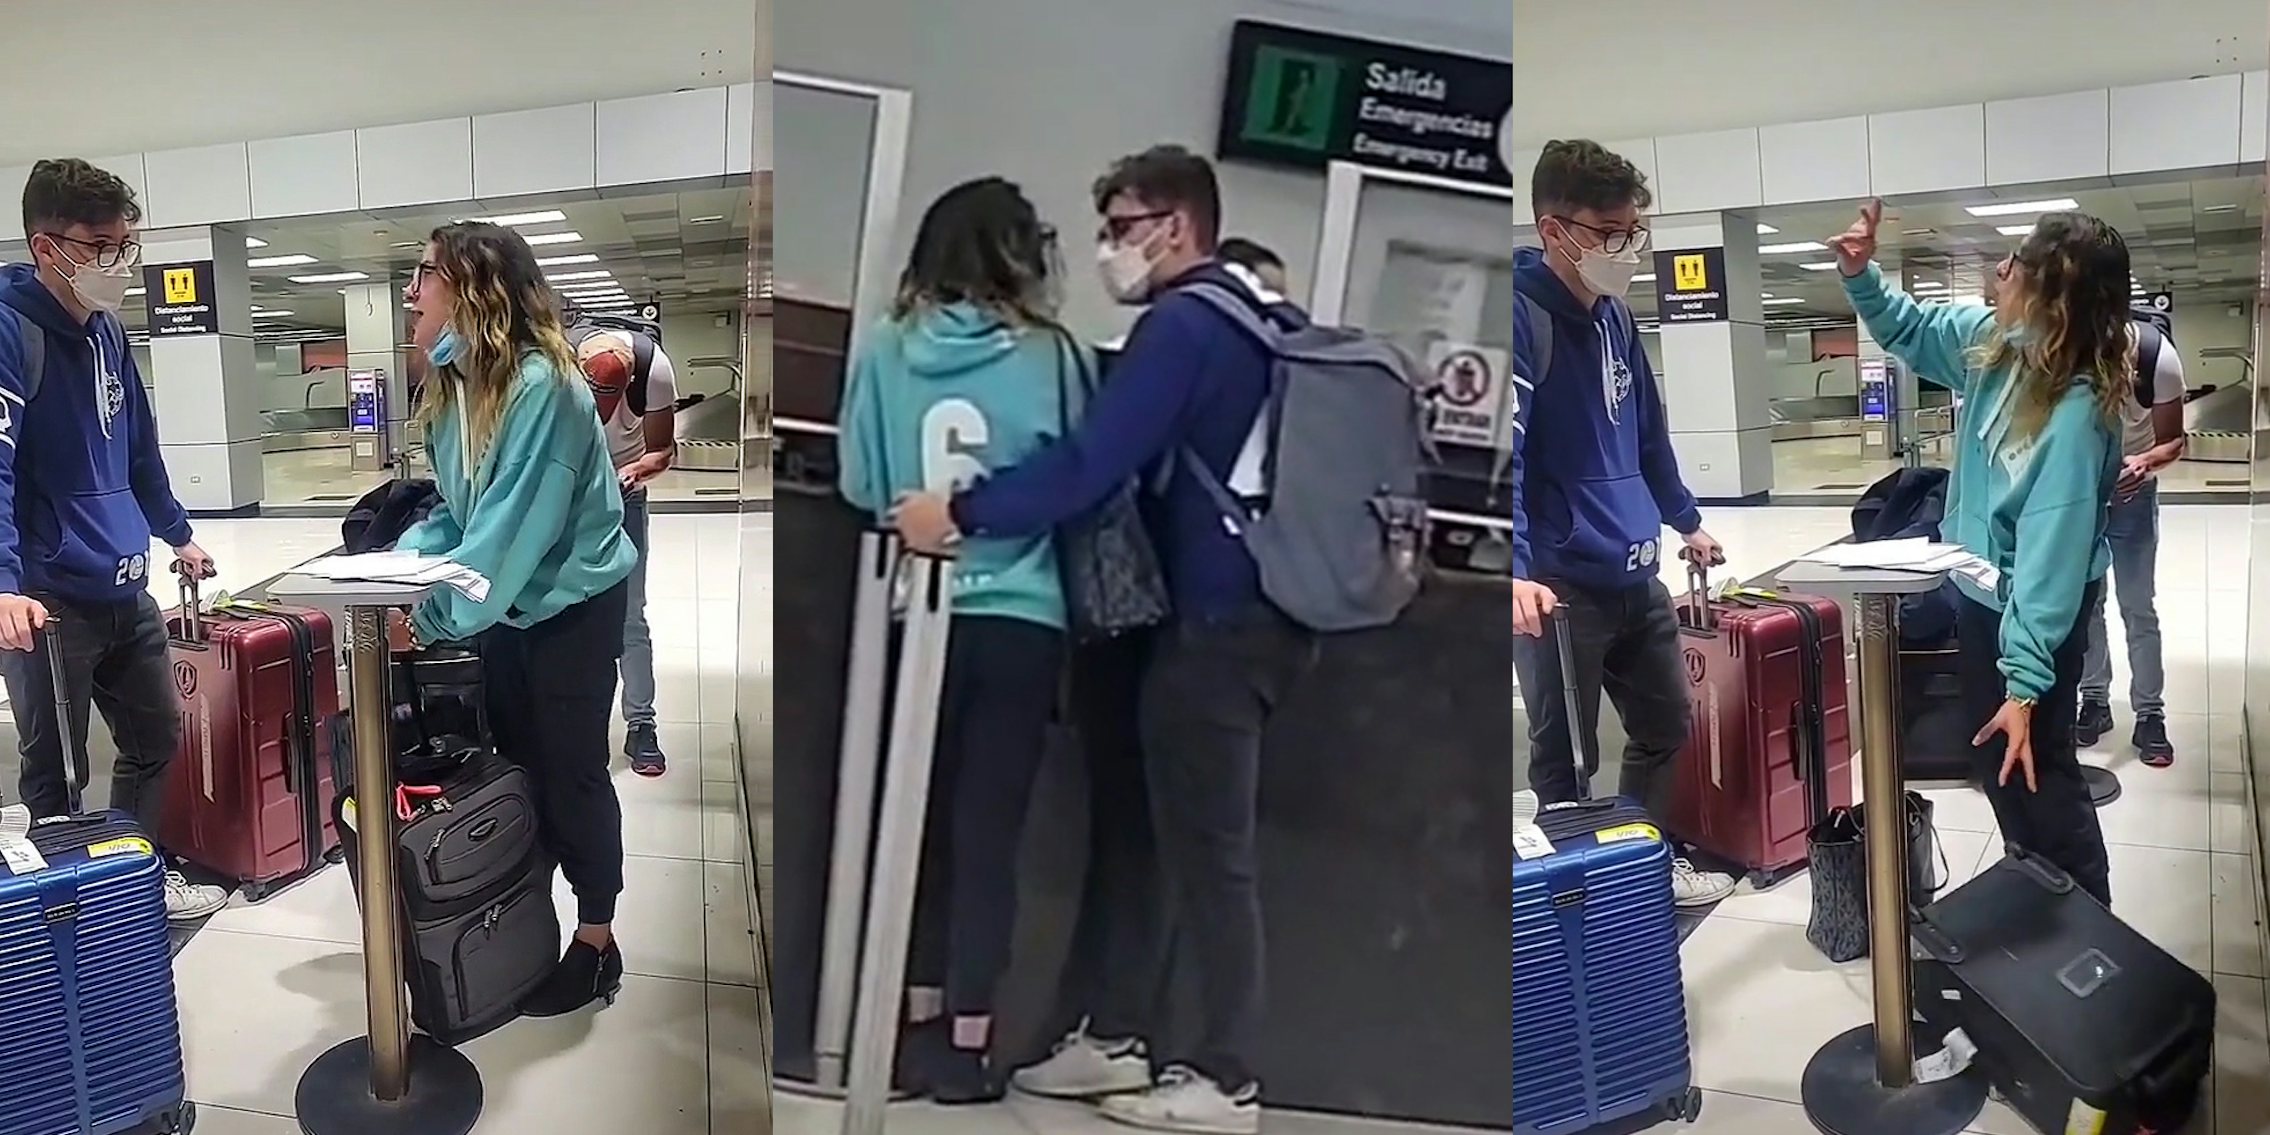 couple at airport holding luggage girlfriend yelling at boyfriend (l) couple at airport in line (c) couple at airport holding luggage girlfriend hand up yelling at boyfriend (r)